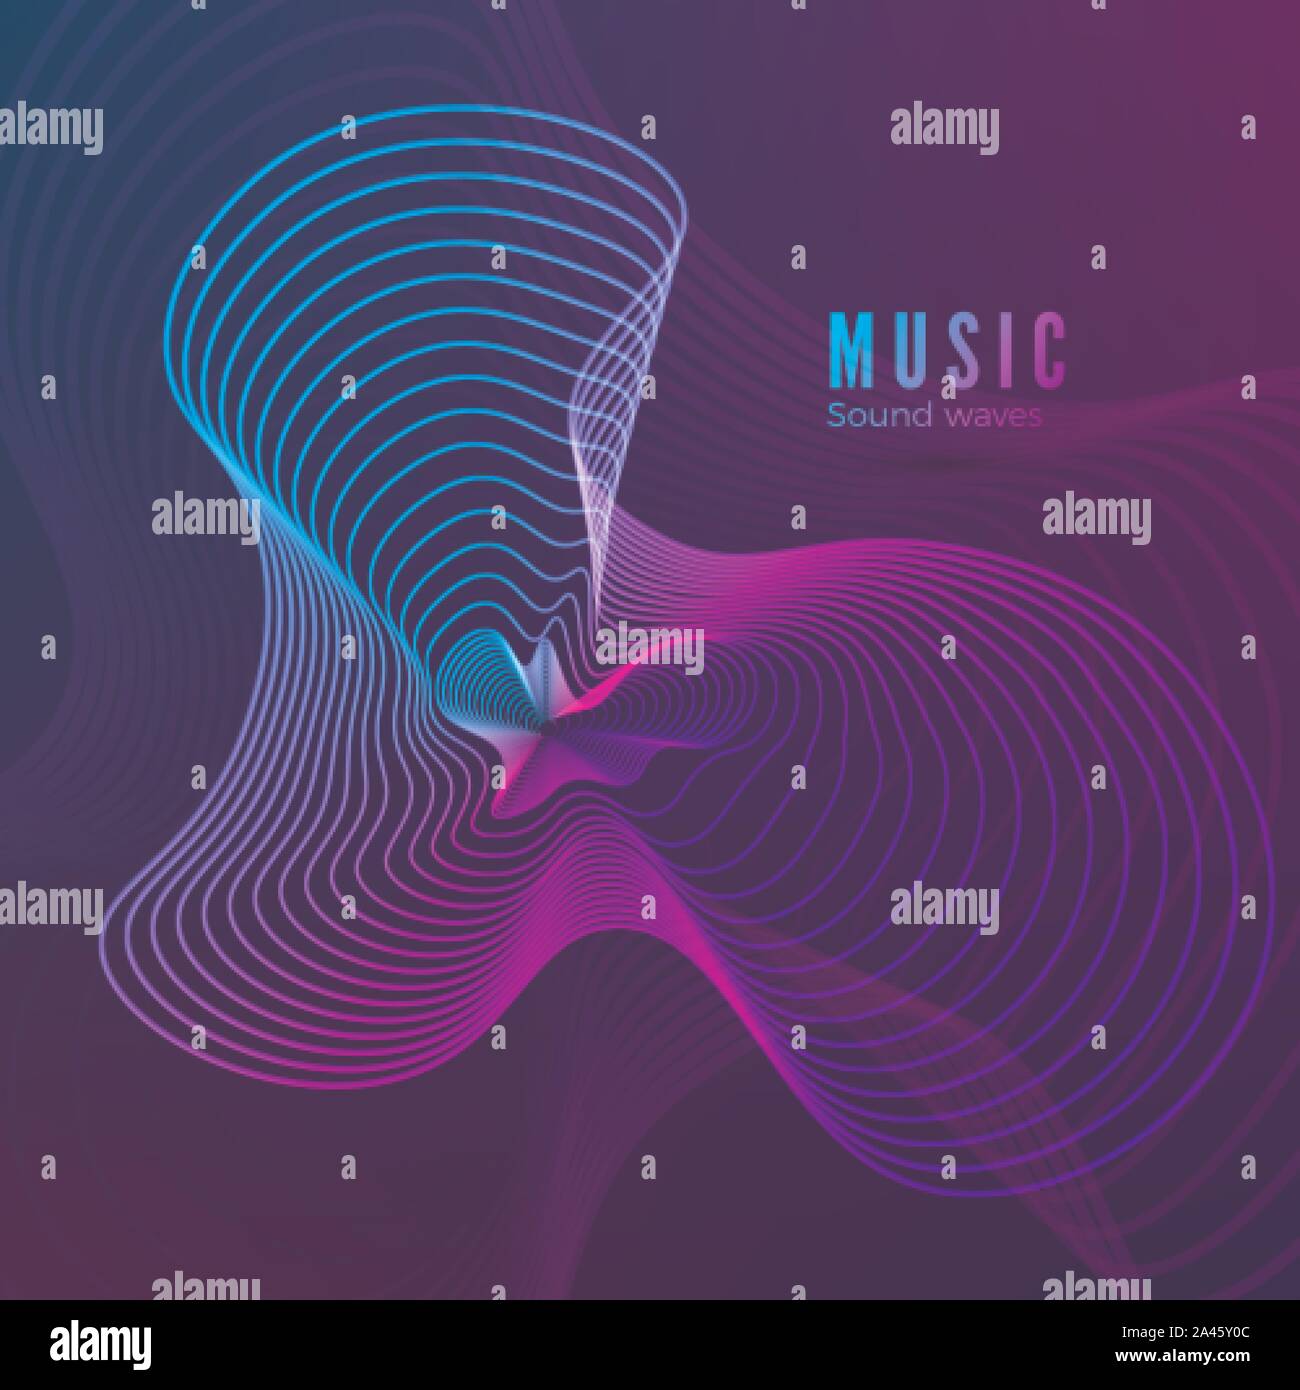 Music sound wave template. Blue and purple colors illustration for your album cover design. Abstract radial digital signal form. Vector Stock Vector